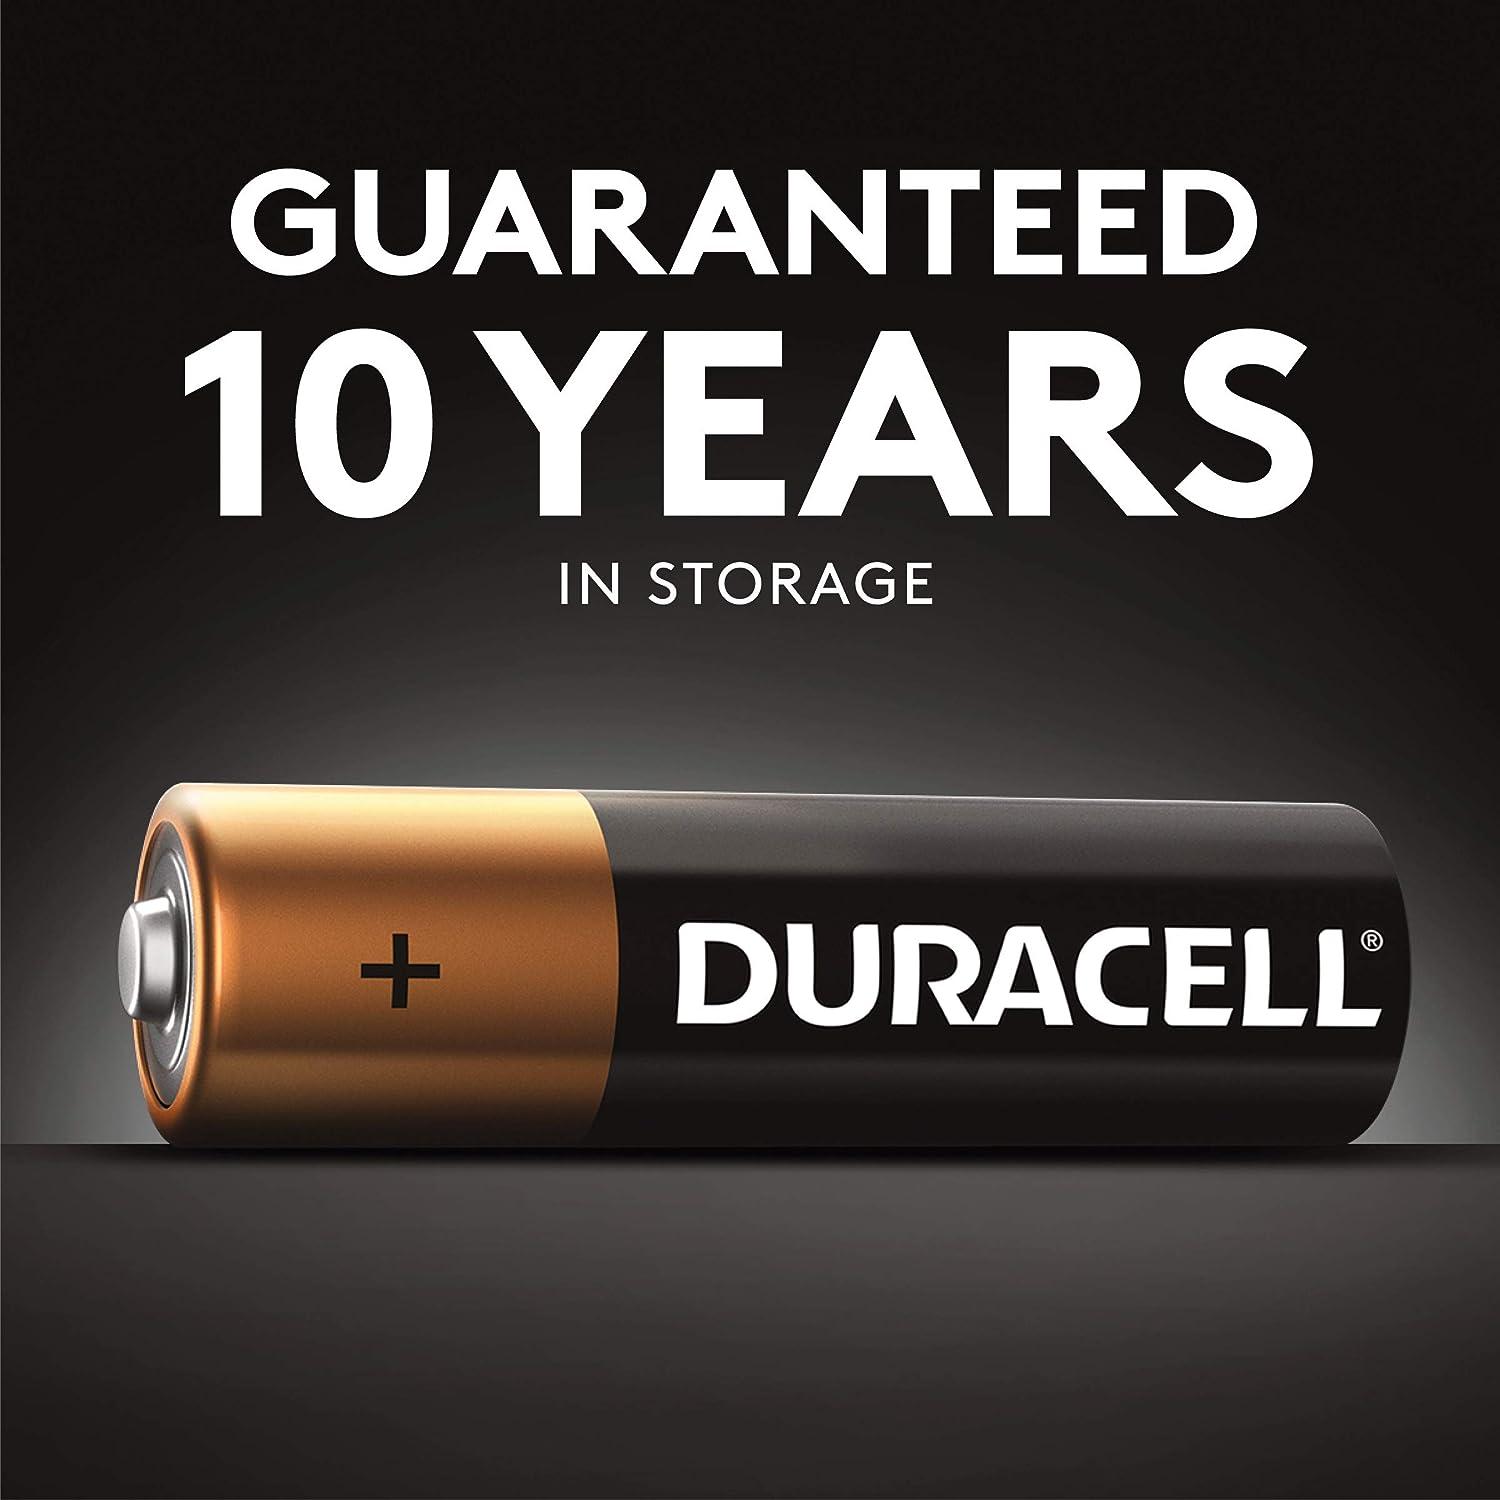 Duracell Coppertop 9V Battery, 6 Count Pack, 9-Volt Battery with  Long-lasting Power, All-Purpose Alkaline 9V Battery for Household and  Office Devices